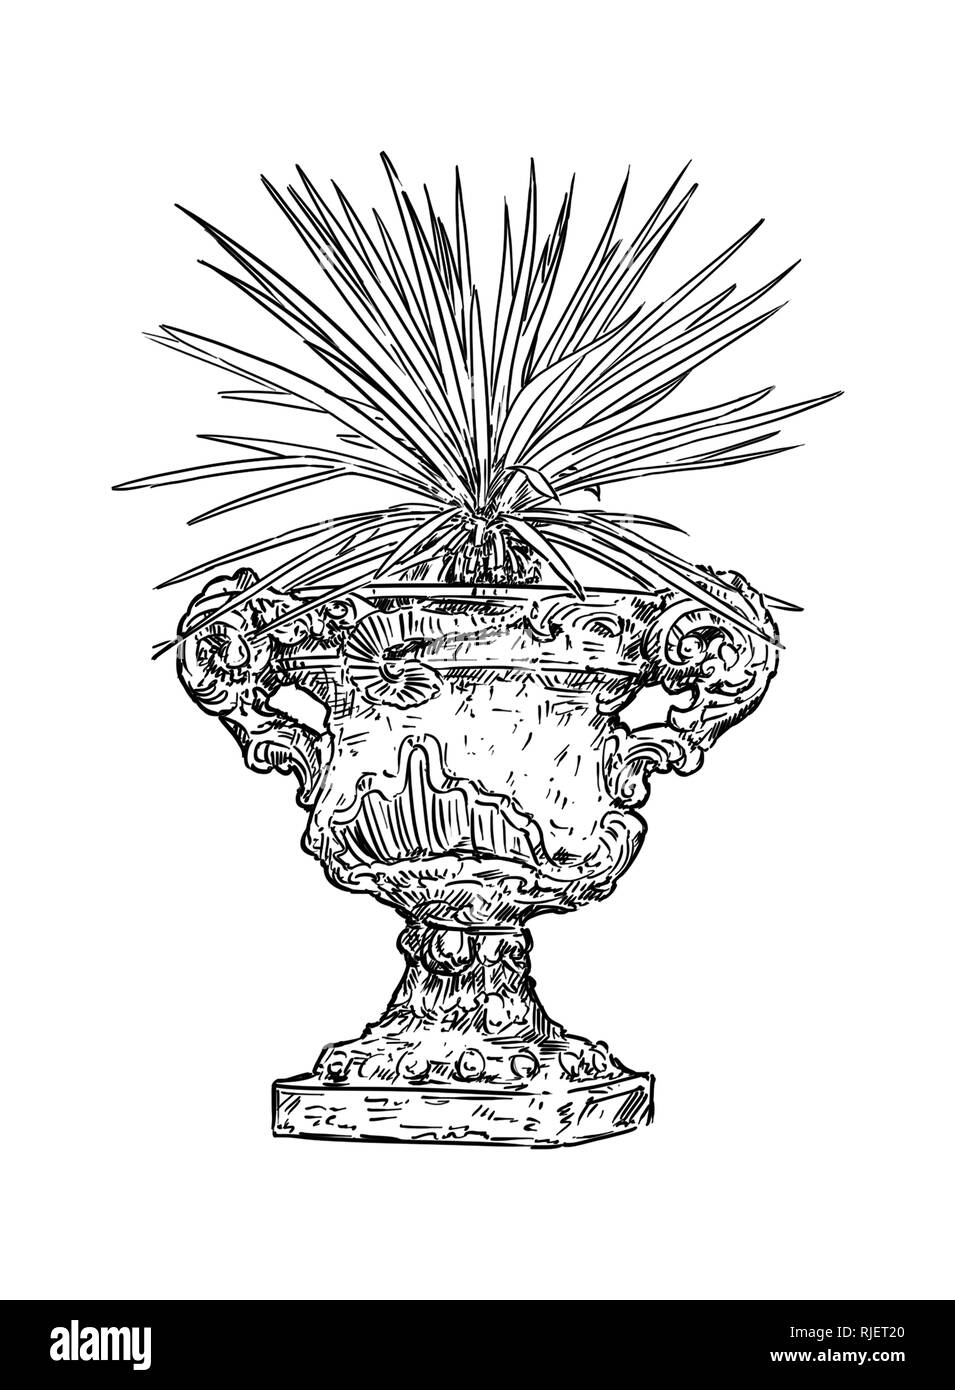 Drawing of Old Antique Ornamental Stone Goblet or Vase With Yucca Plant Stock Photo